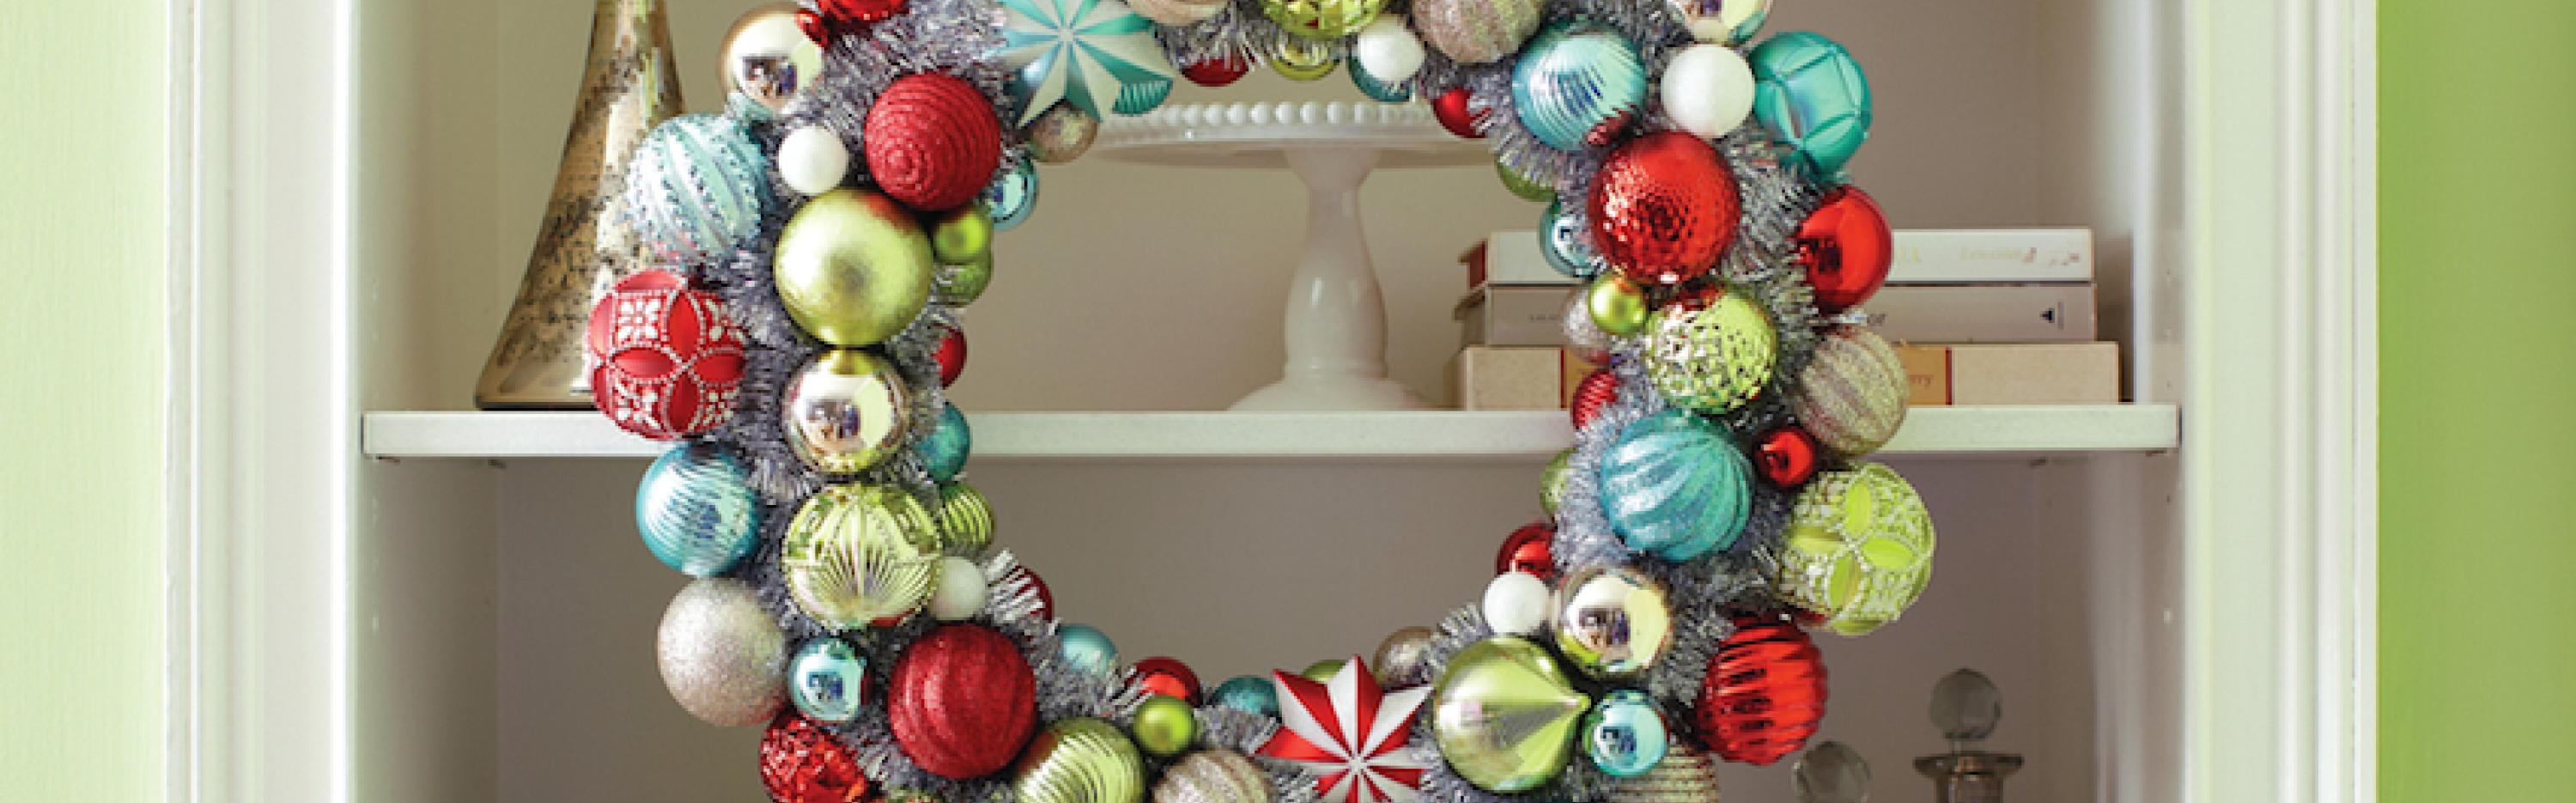 Holiday Frosted Traditions Wreath